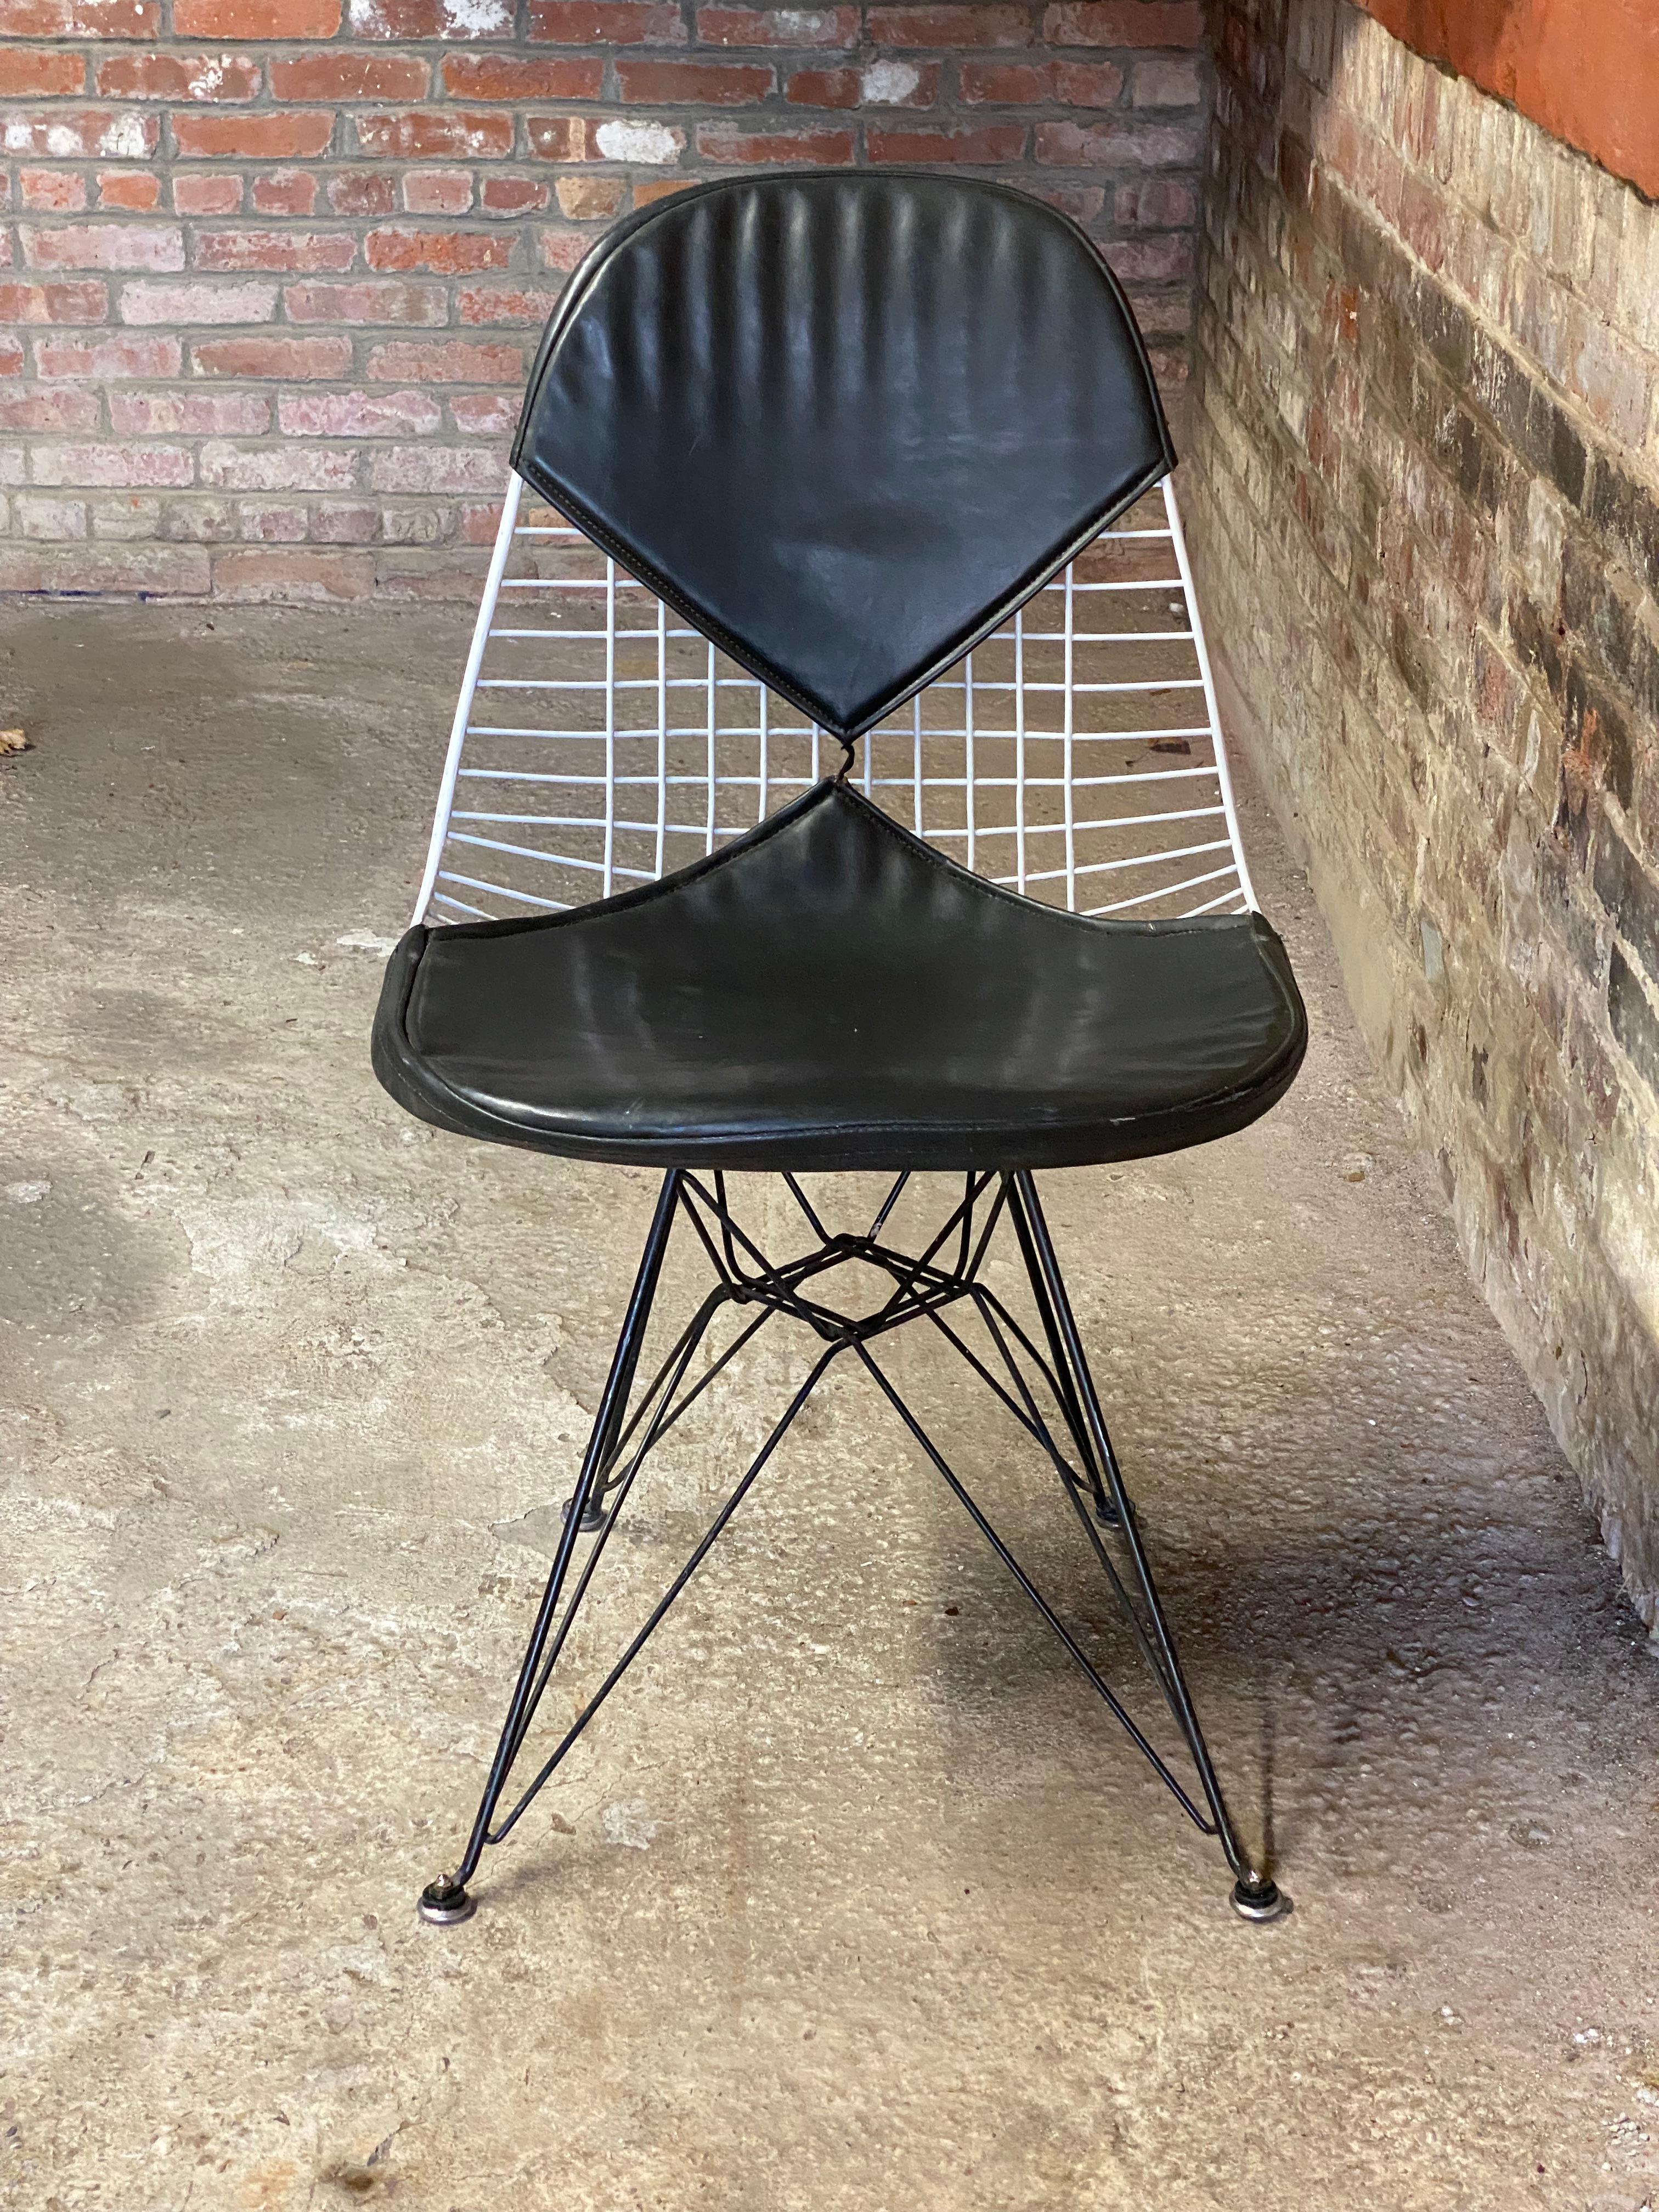 First generation Eames DKR-2 Eiffel Tower base side chair with the distinct splayed feet and the black base (which was only released in the early version). The Bikini chair's cover is all original. The bikini cover still retains the original Herman